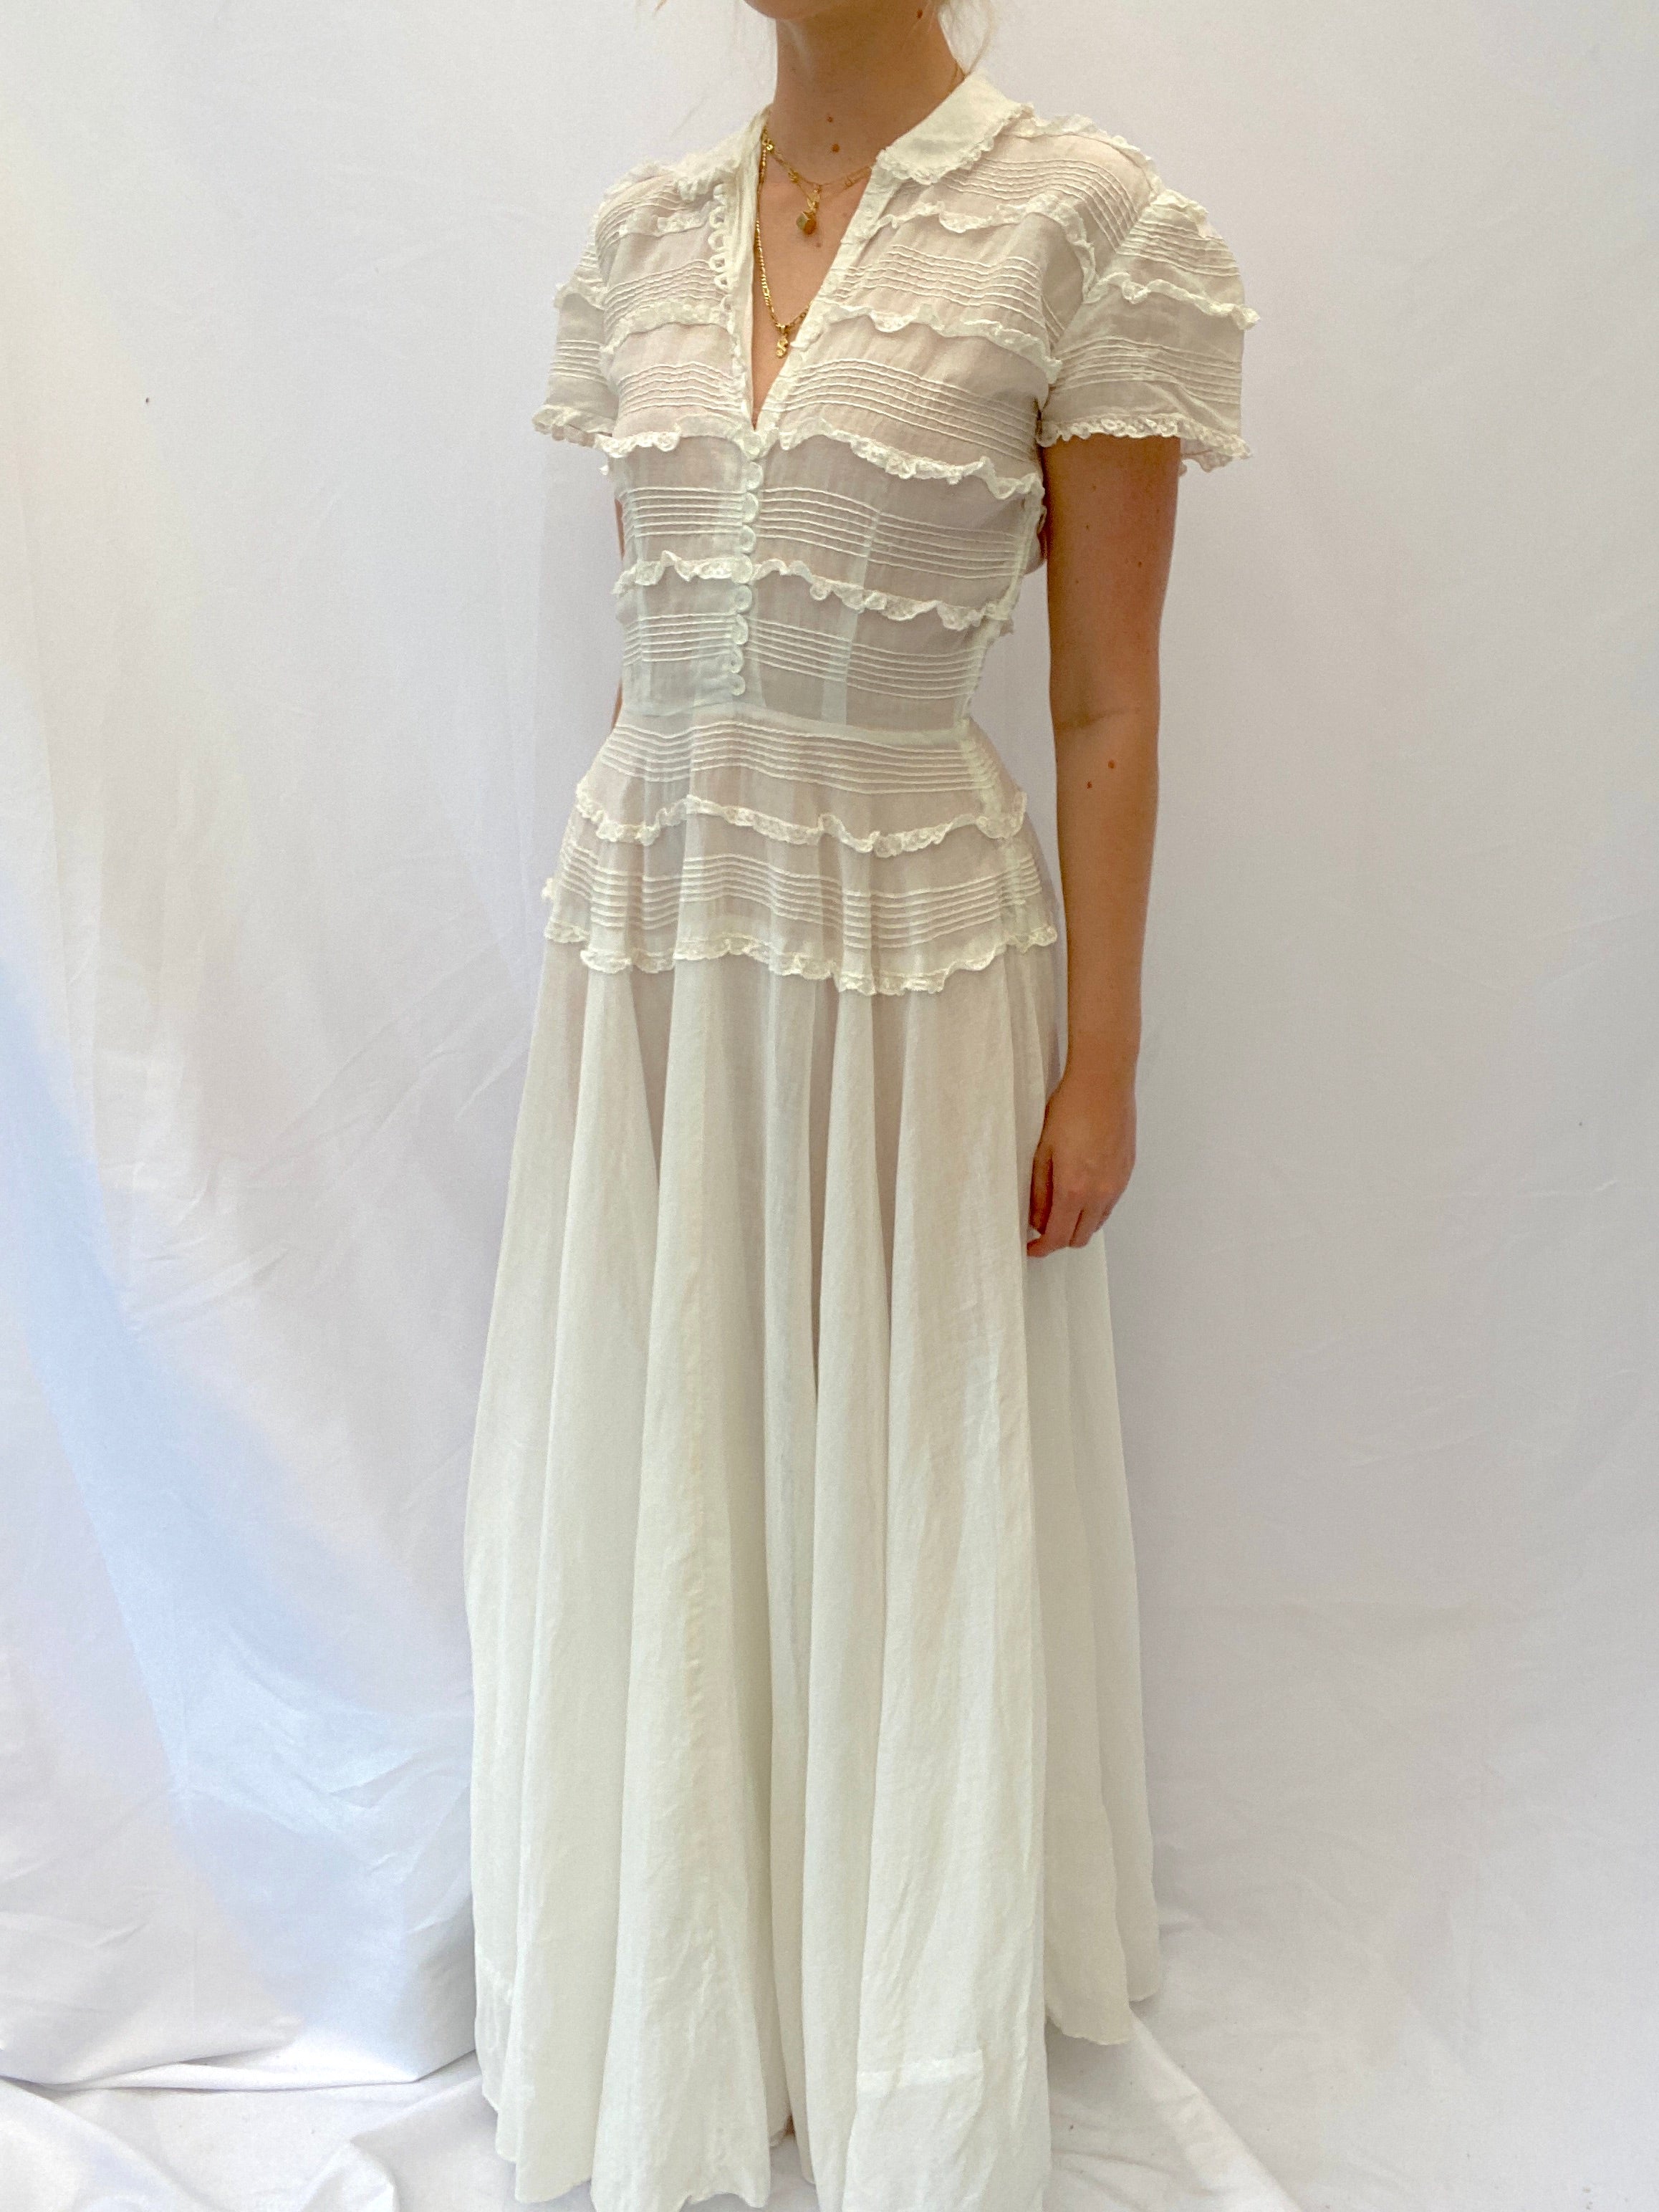 1940's White Cotton Dress with Lace Ruffles and Cap Sleeve